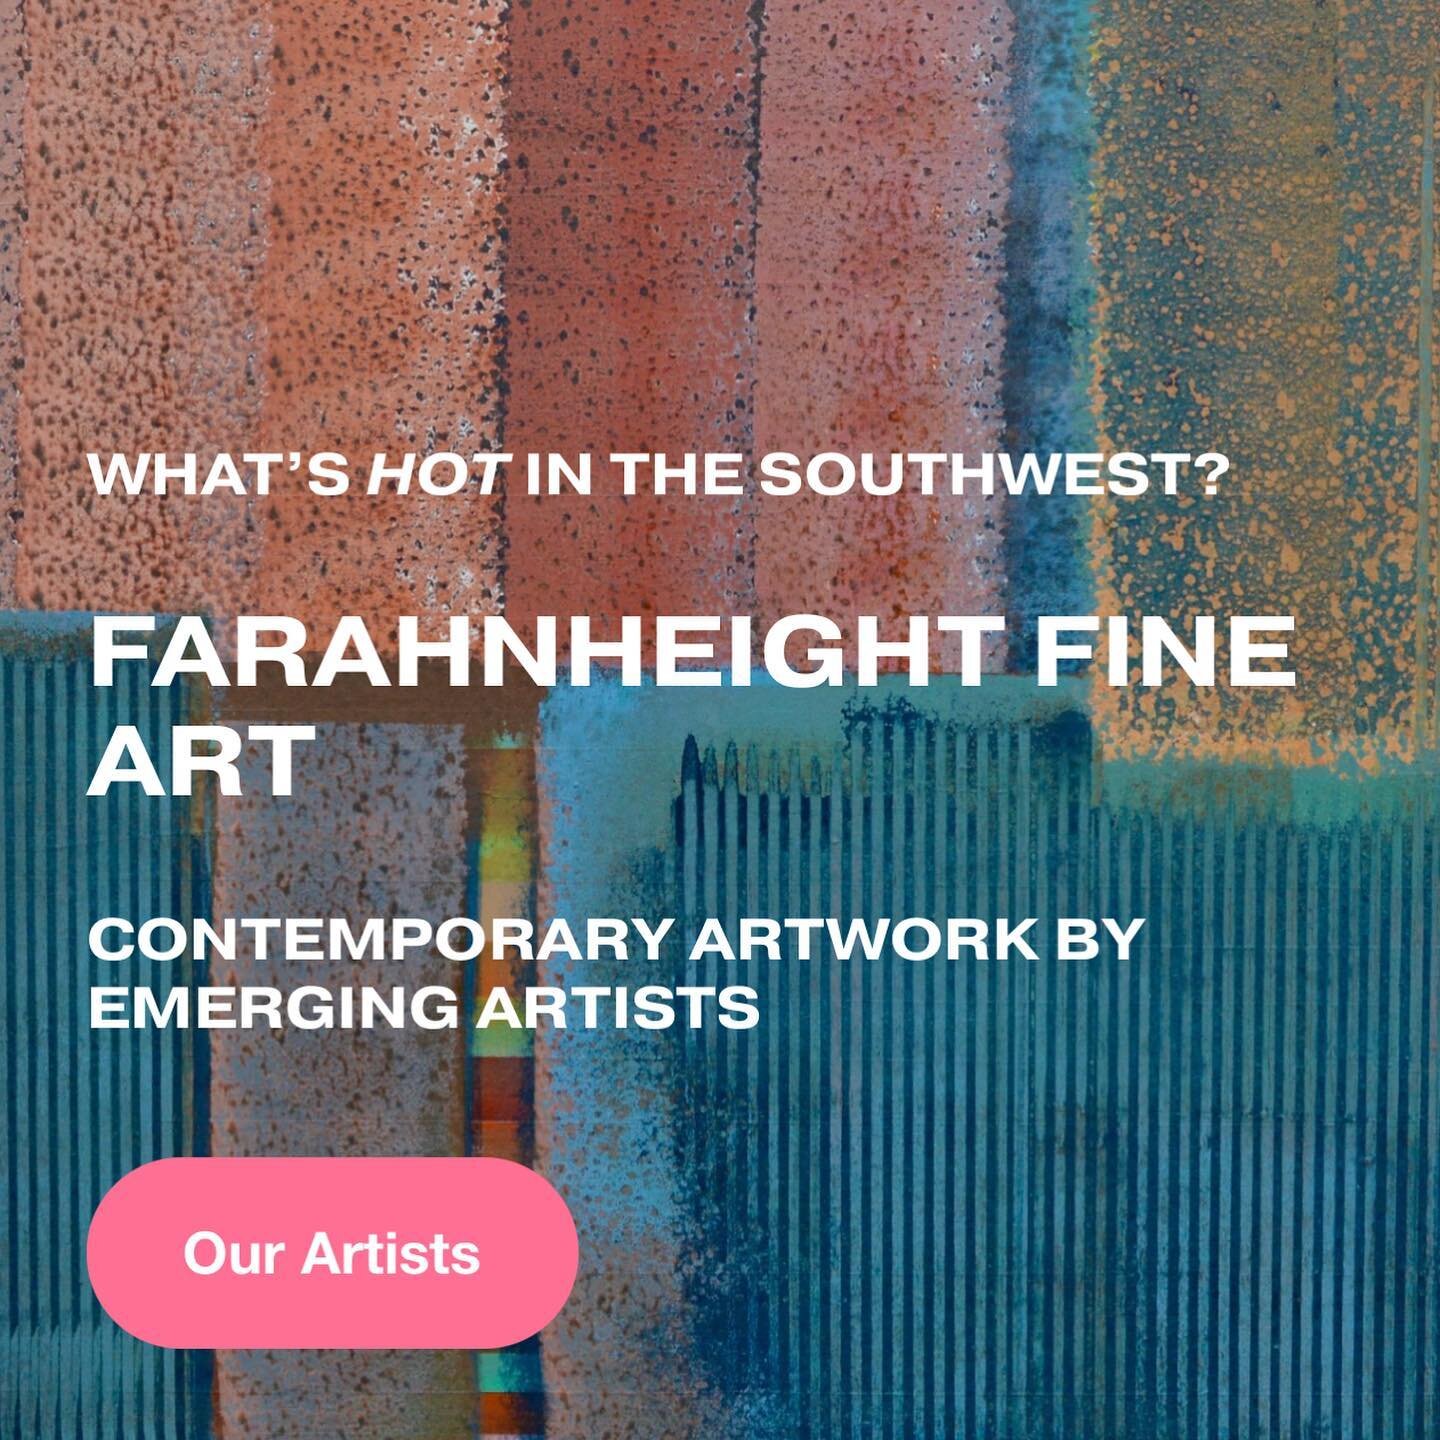 New @squarespace website just launched for our client @farahnheight gallery in Santa Fe, NM 〰 

Visit www.farahnheight.com ➰

Thank you Gregory Farah for supporting our local Native woman-owned business! 👩🏻&zwj;💻

#nativebusiness #squarespace #web